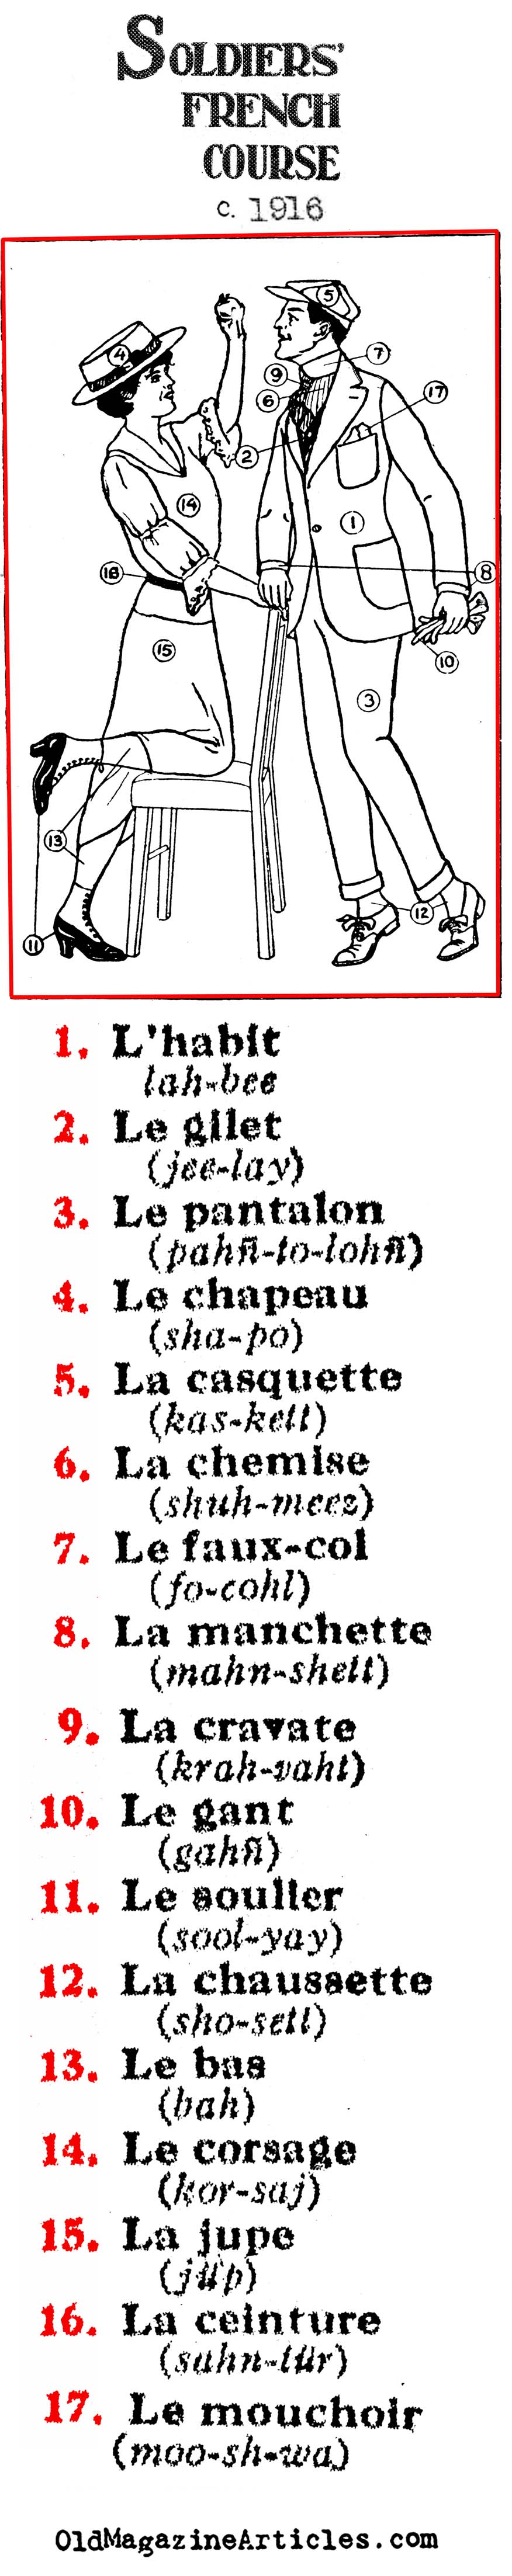 A Very Short English French Dictionary of Shopping Terms   (Soldier's French Course, 1916)